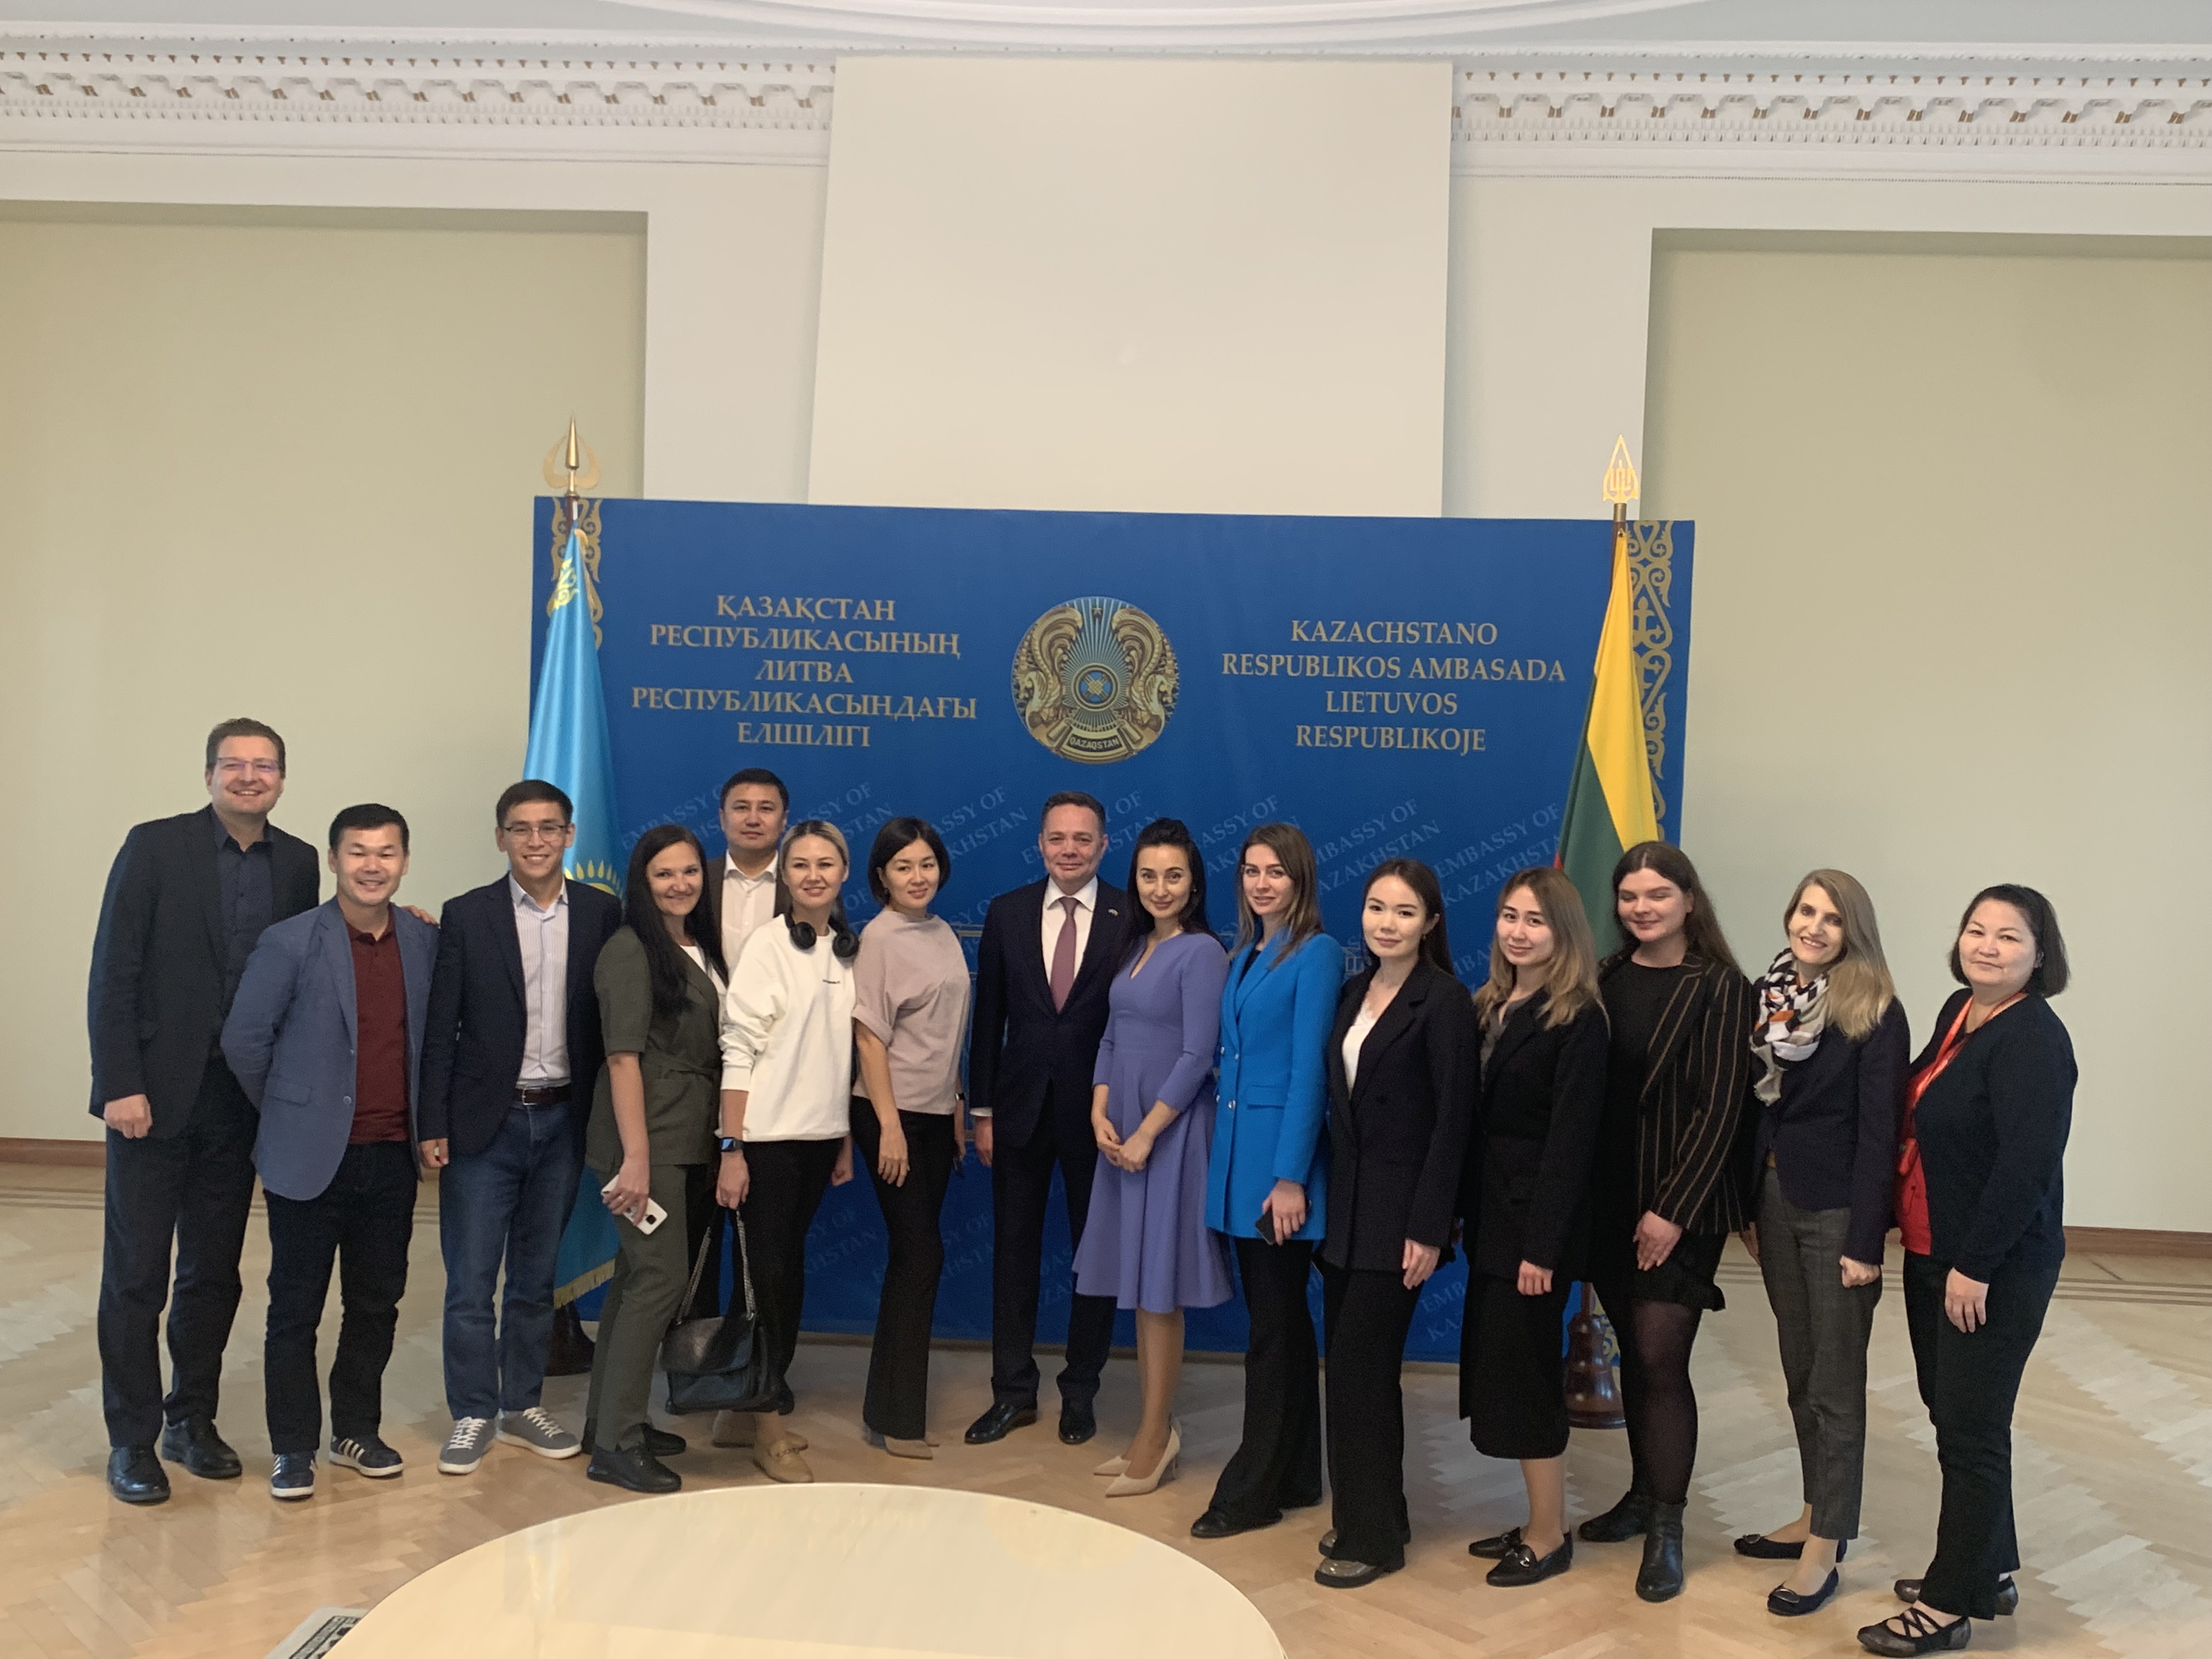 Ambassador met with the heads of the press services of state bodies of Kazakhstan and journalists from Kazakhstani media